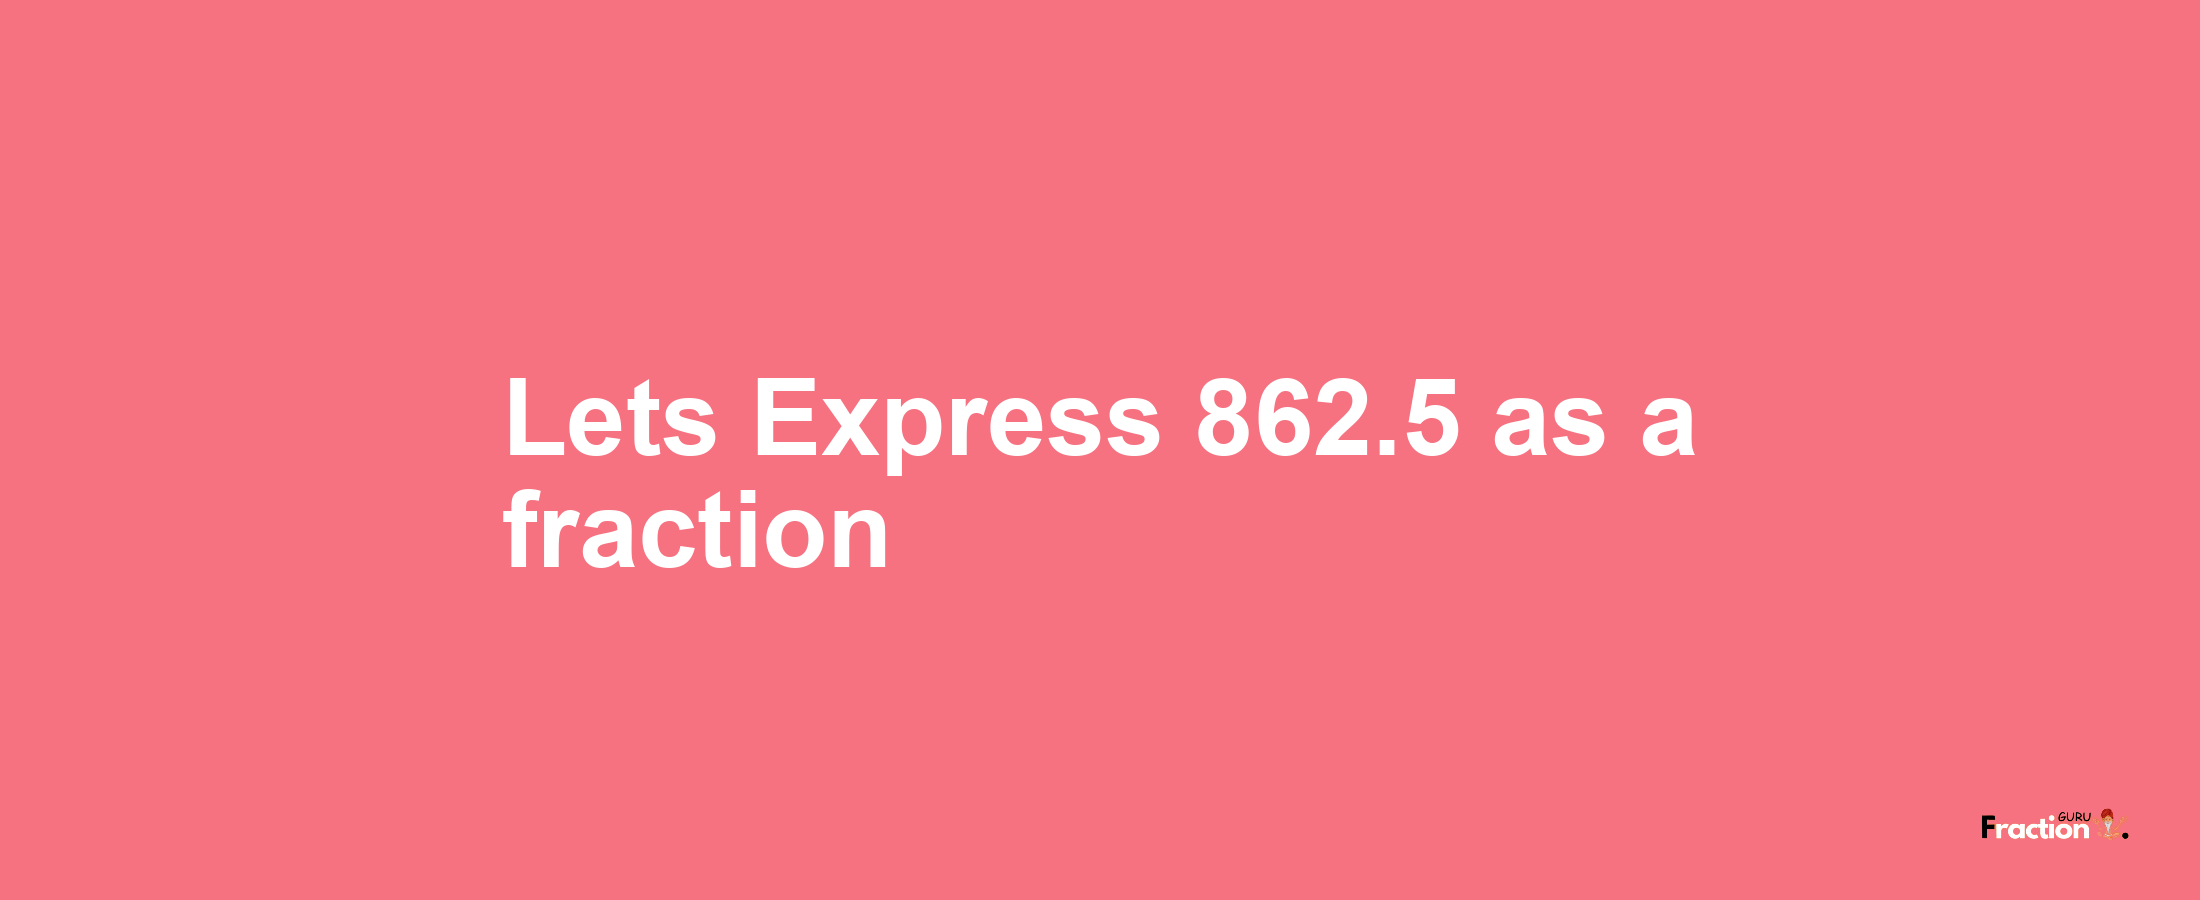 Lets Express 862.5 as afraction